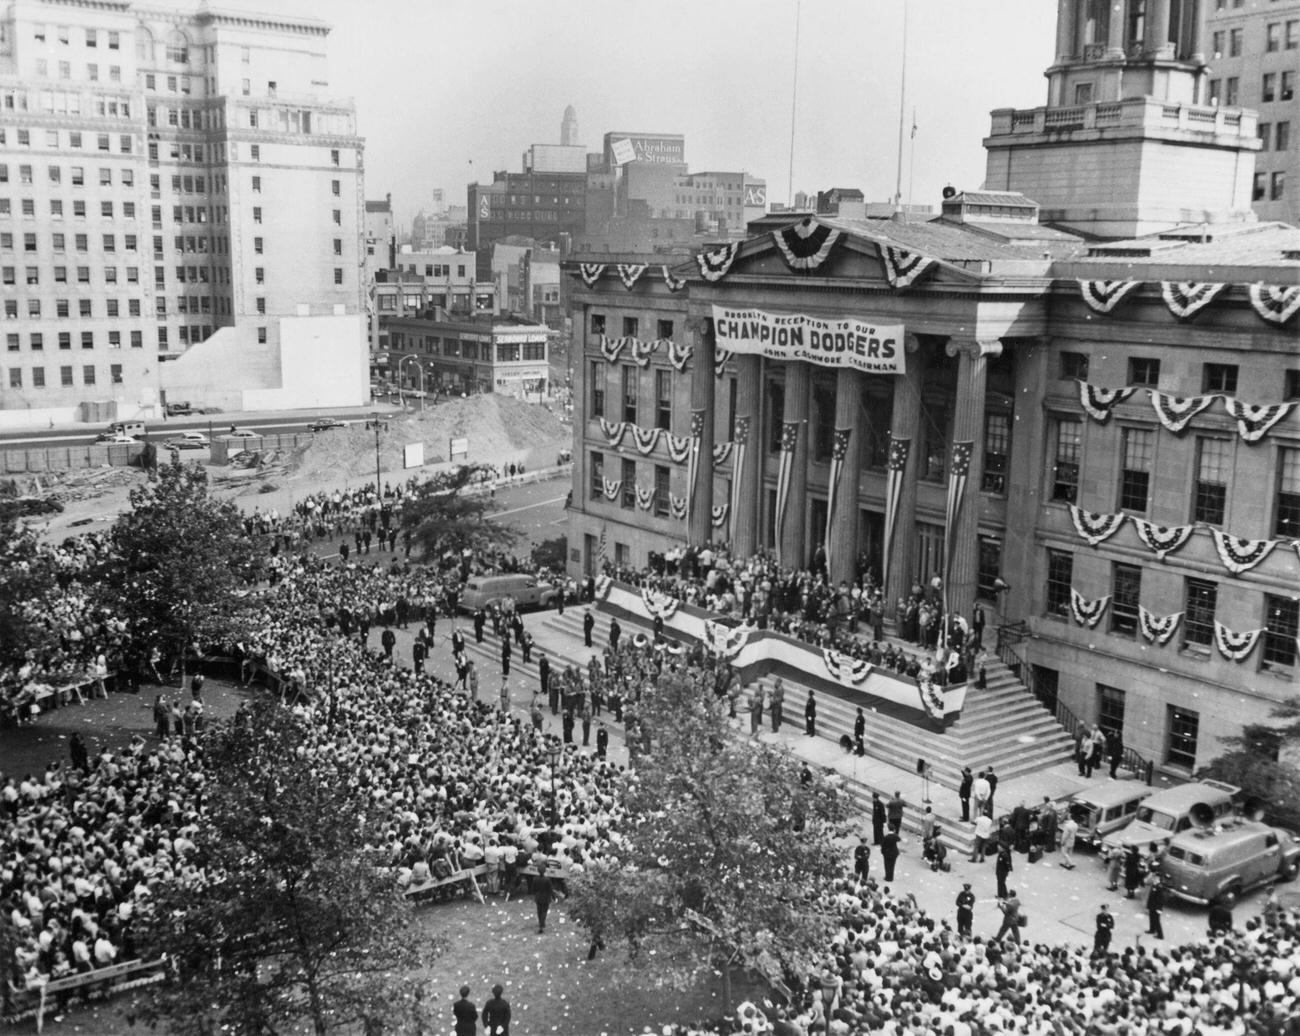 Banner Across Brooklyn Borough Hall During Dodger Victory Celebration Day, Brooklyn, 1955.